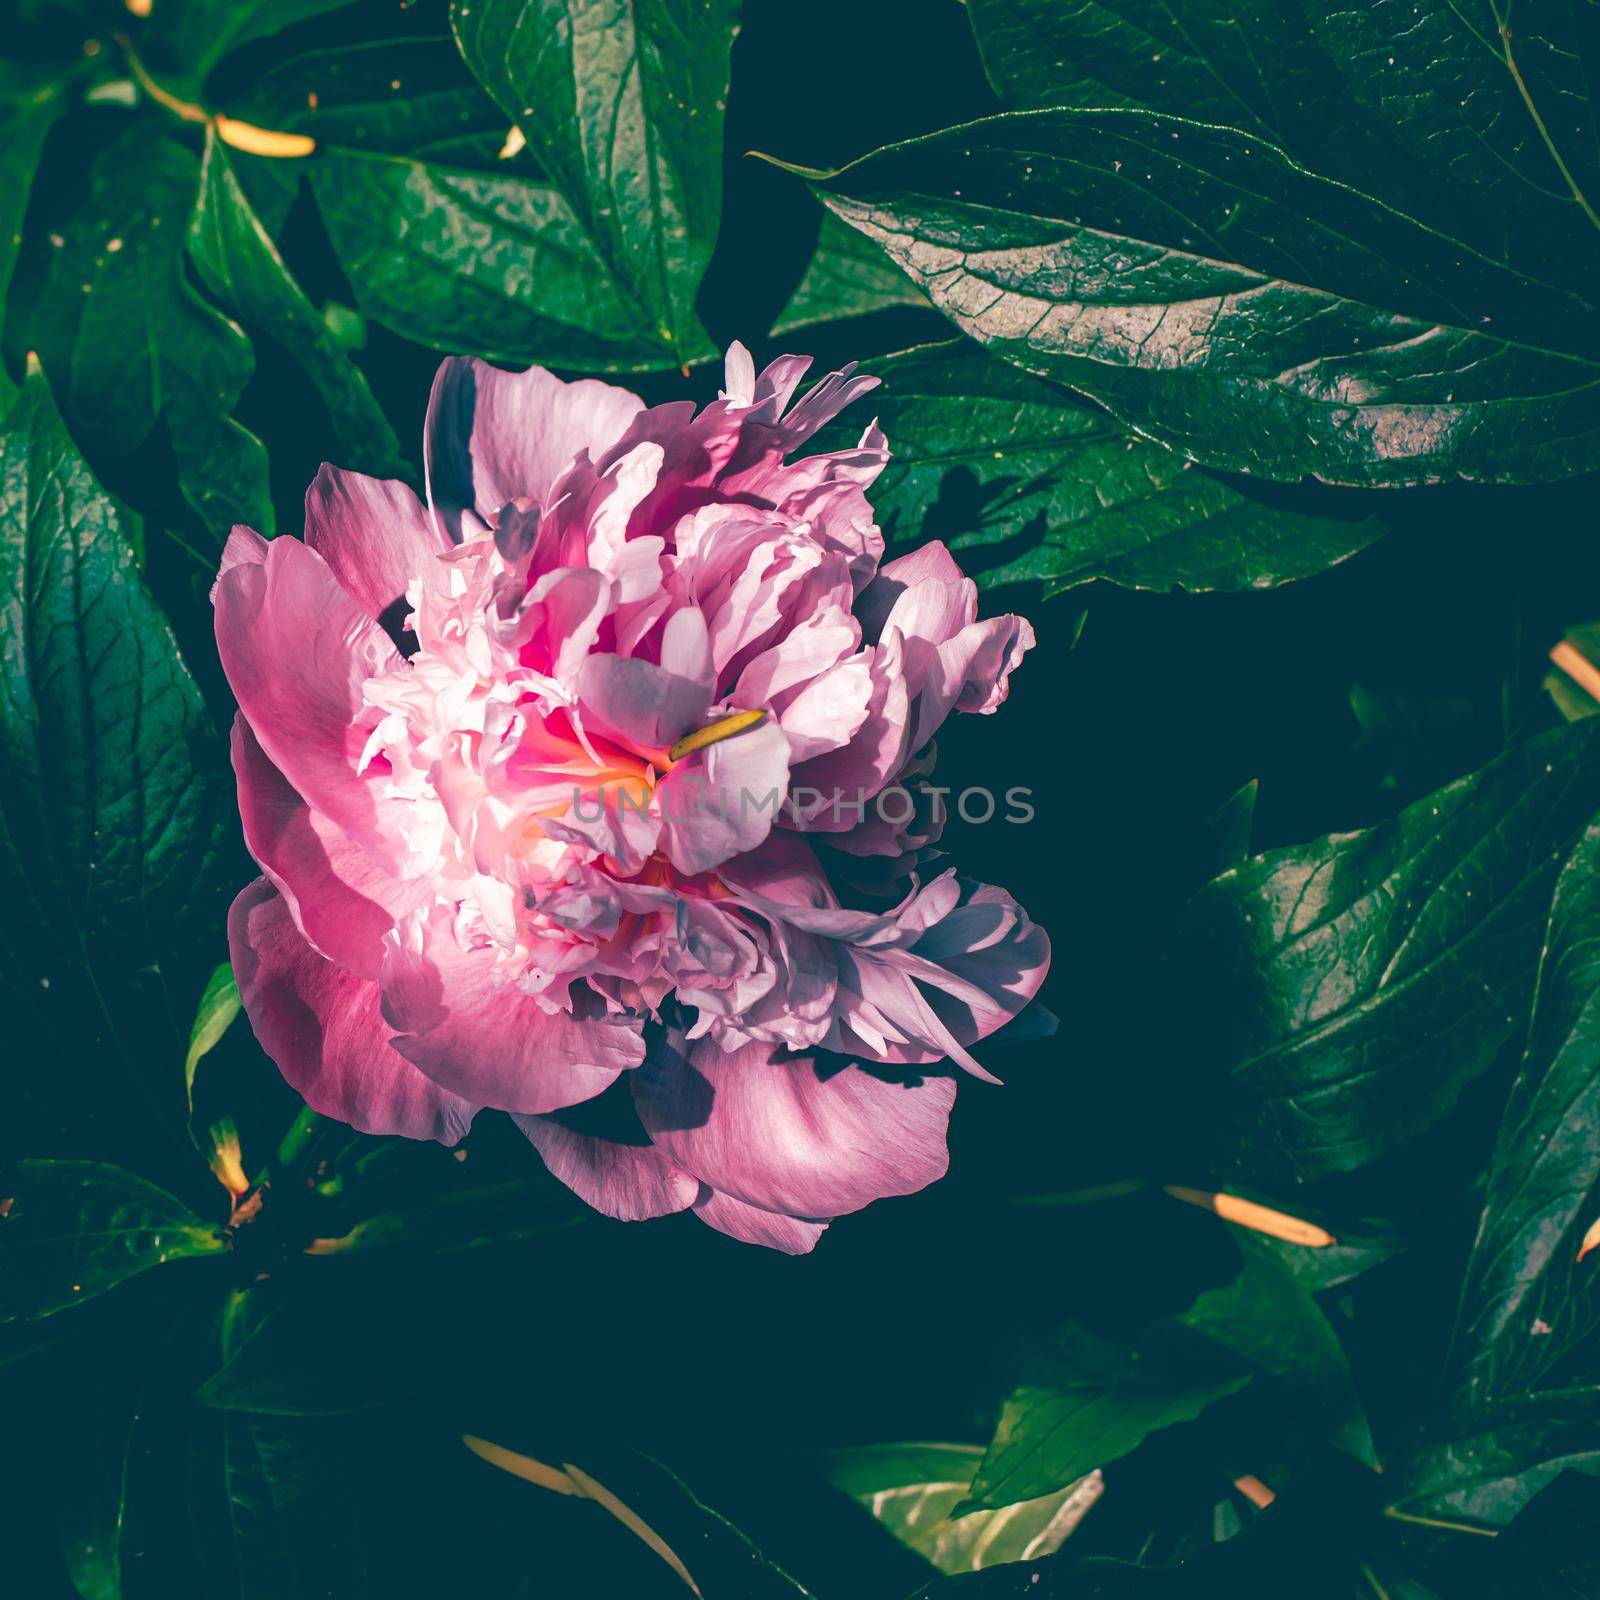 Peony flower in bloom as floral art print and botanical nature background, wedding decor and luxury branding design.